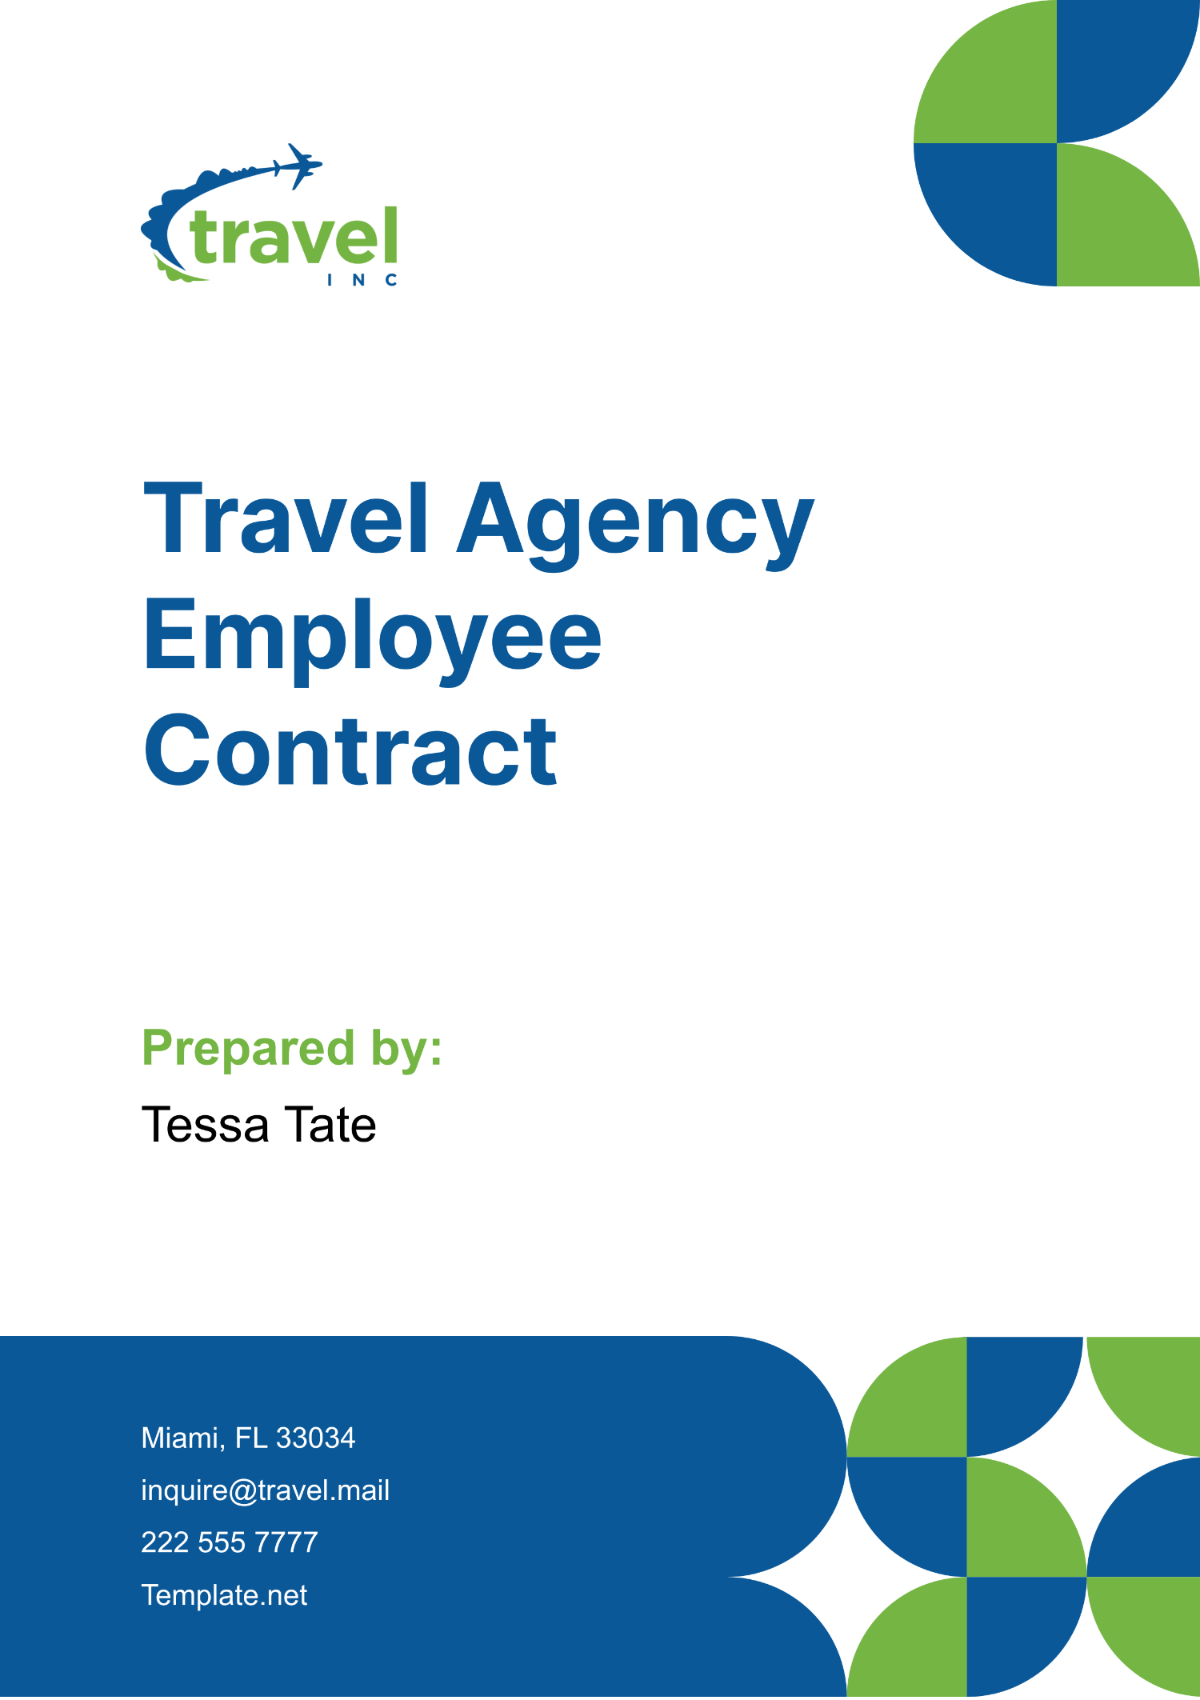 Travel Agency Employee Contract Template